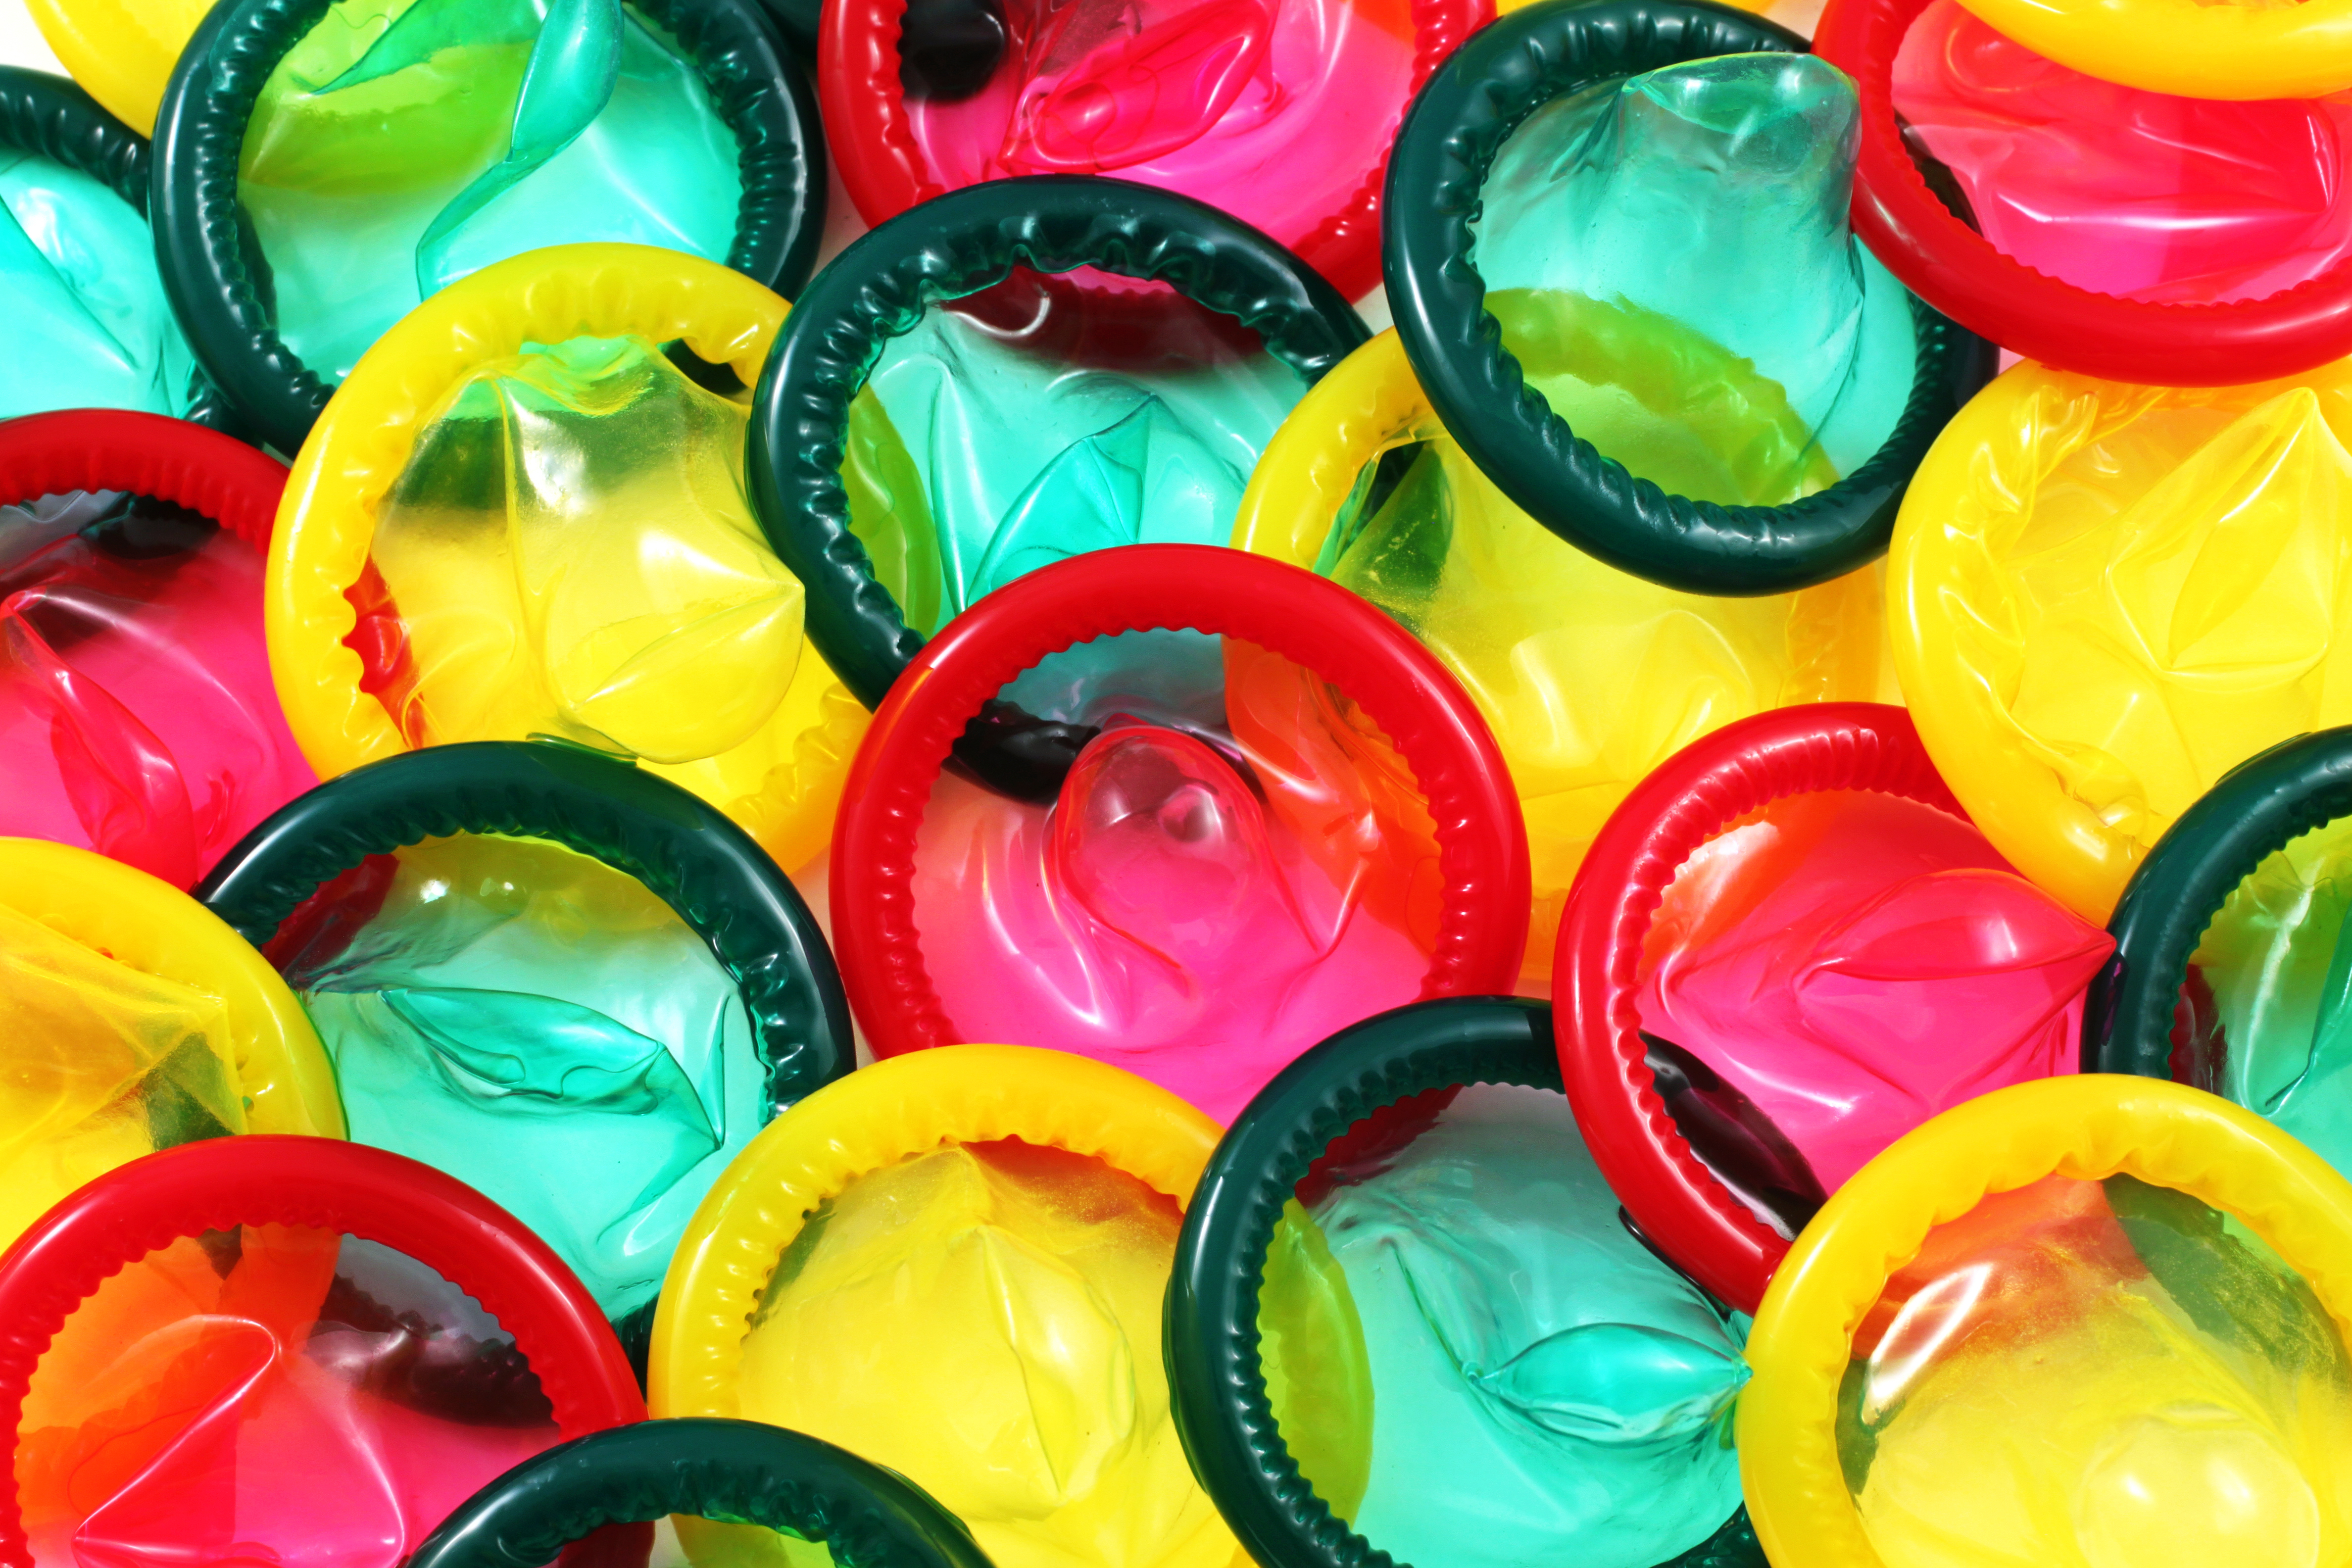 California Makes It Illegal To Remove Condom Without Consent